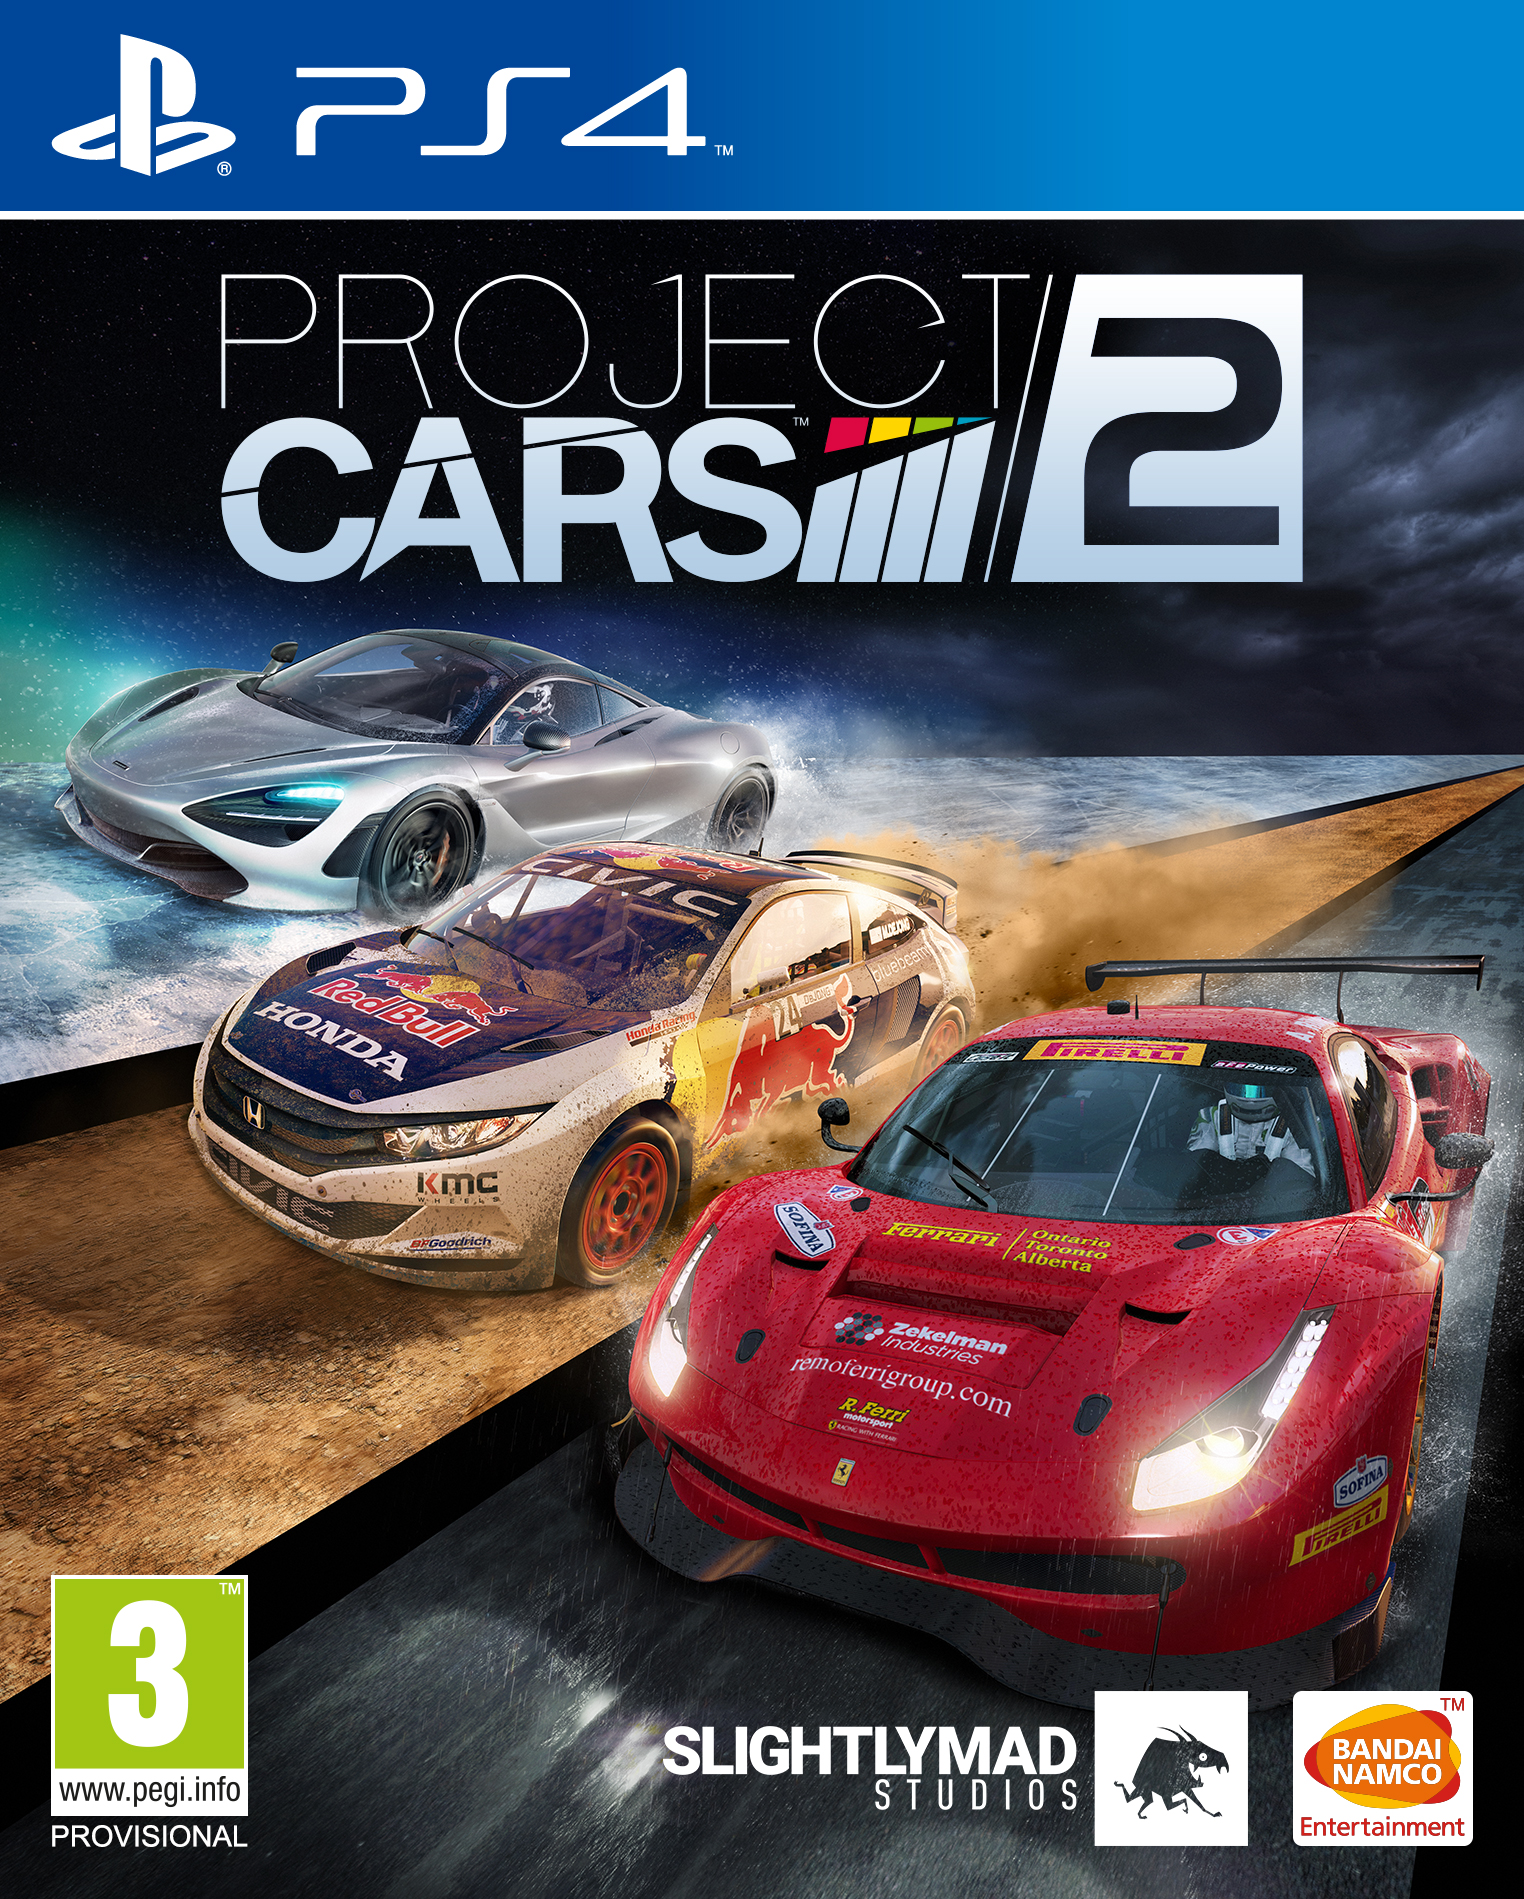 720p project cars 2